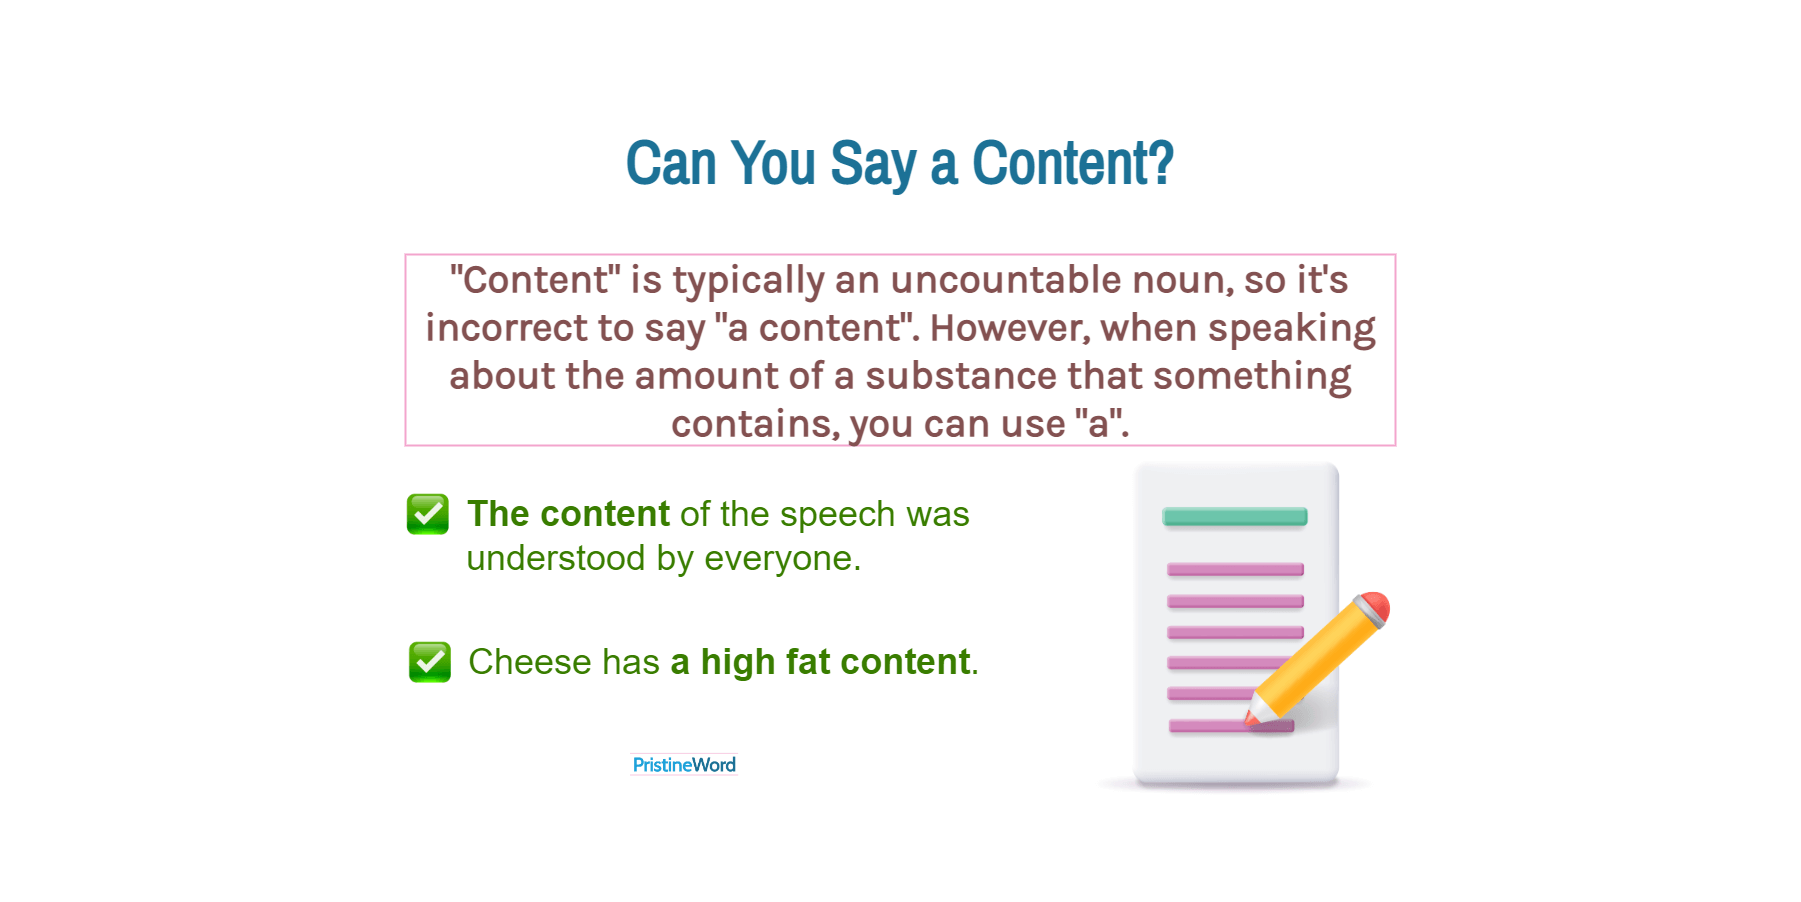 Can You Say 'a Content'?